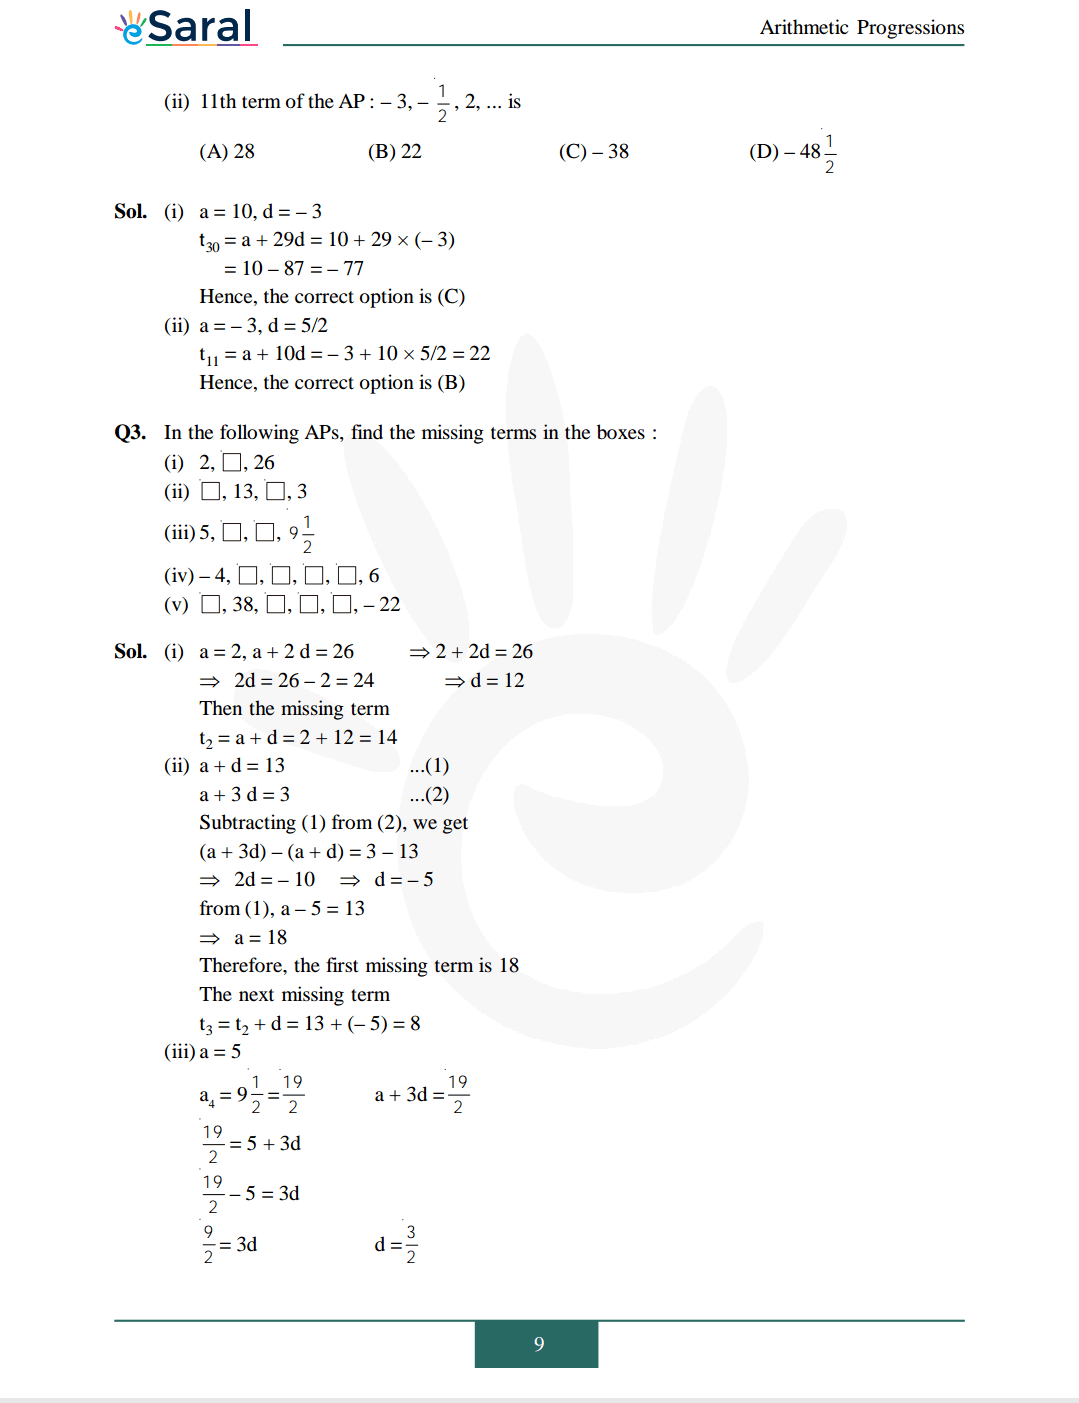 Class 10 Maths Chapter 5 exercise 5.2 solutions Image 2